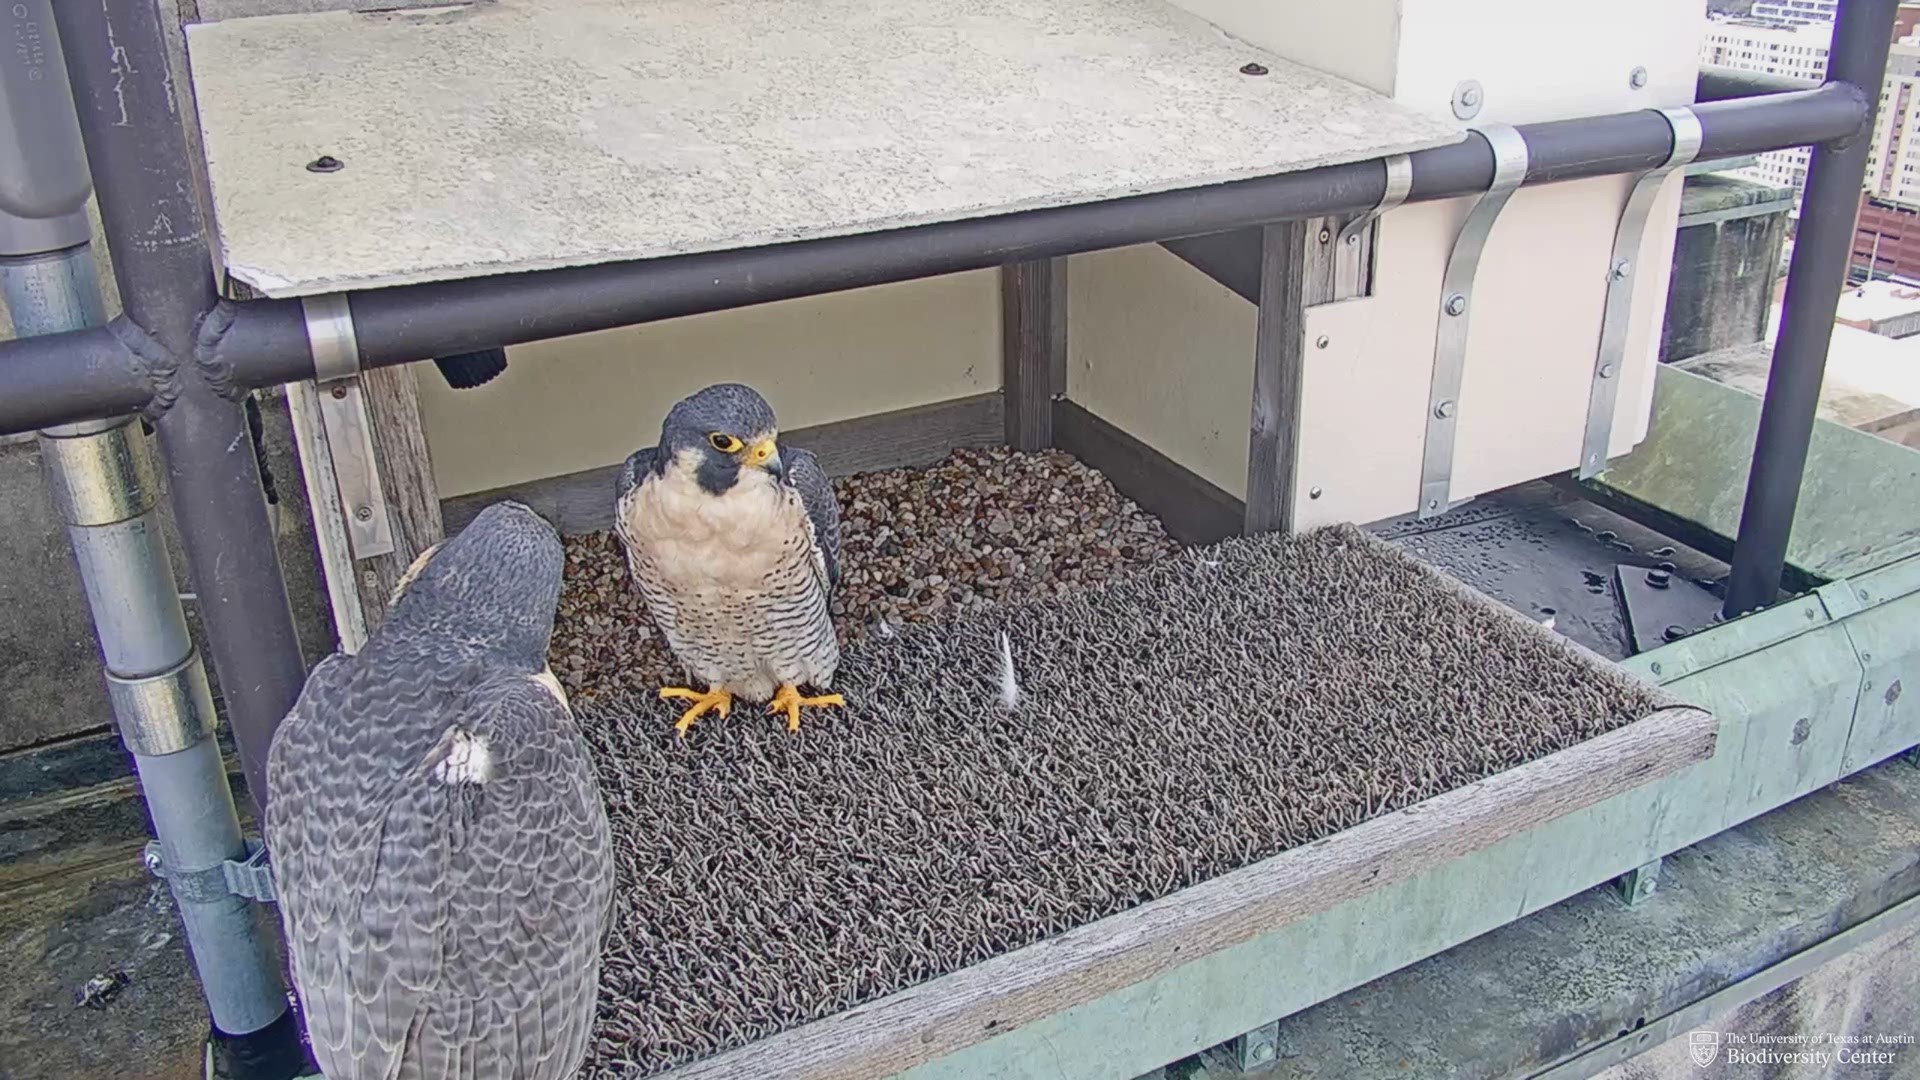 Just in time for Valentine's Day, UT's resident peregrine falcon has been spotted with a potential lover.